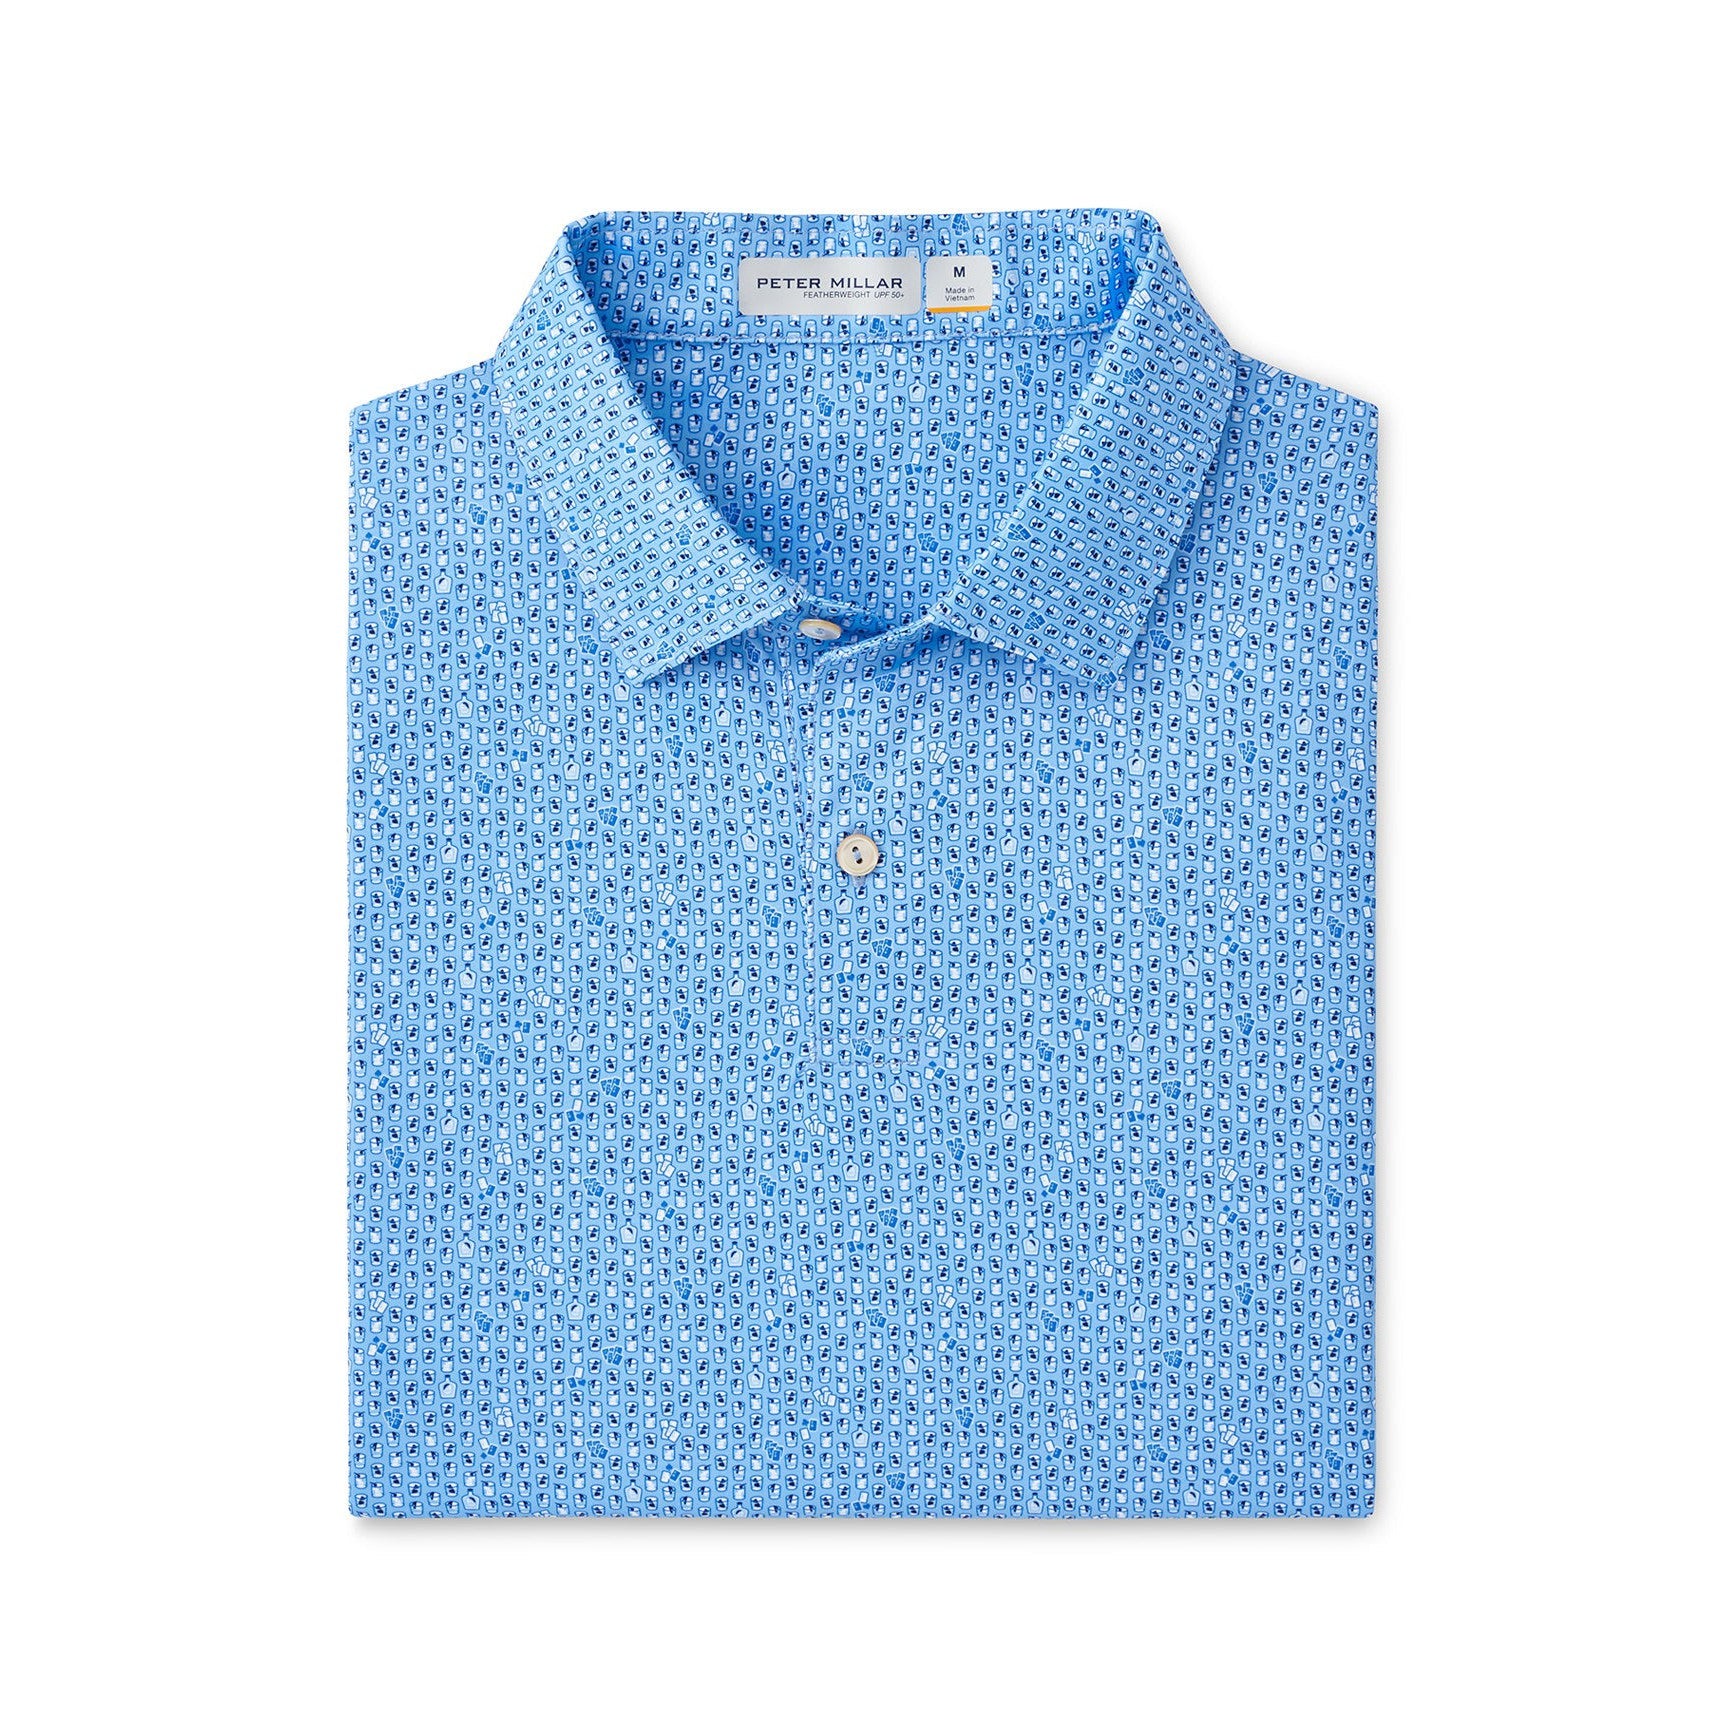 Peter Millar Featherweight Royal Flush Polo-Men's Clothing-Cottage Blue-S-Kevin's Fine Outdoor Gear & Apparel